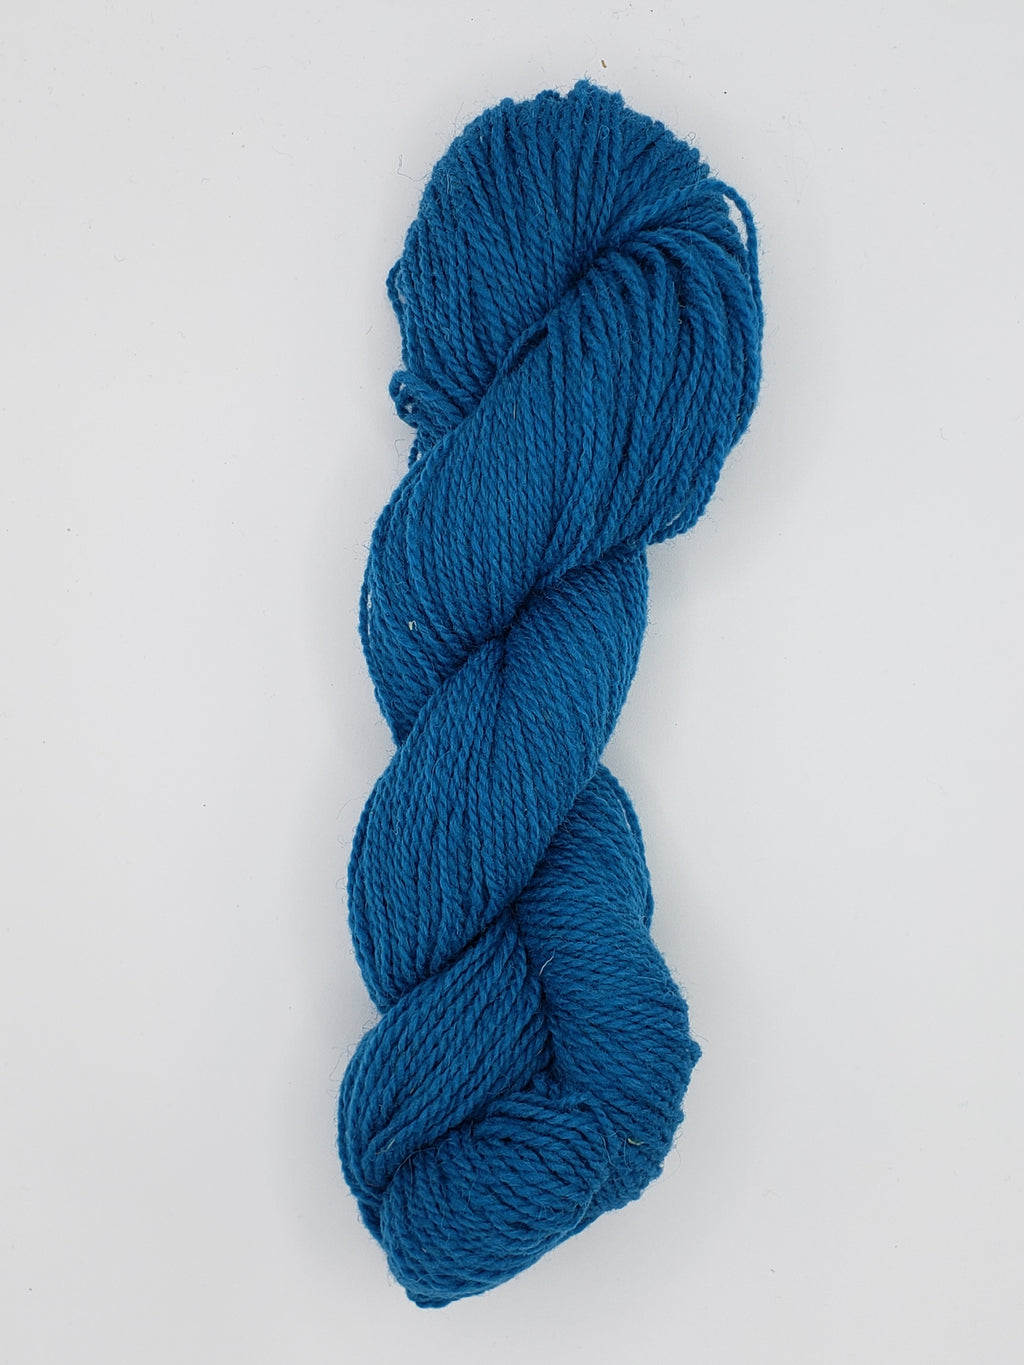 ISLAND WOOL - ROYAL BLUE- 2 Ply Worsted Yarn for Rug Hooking